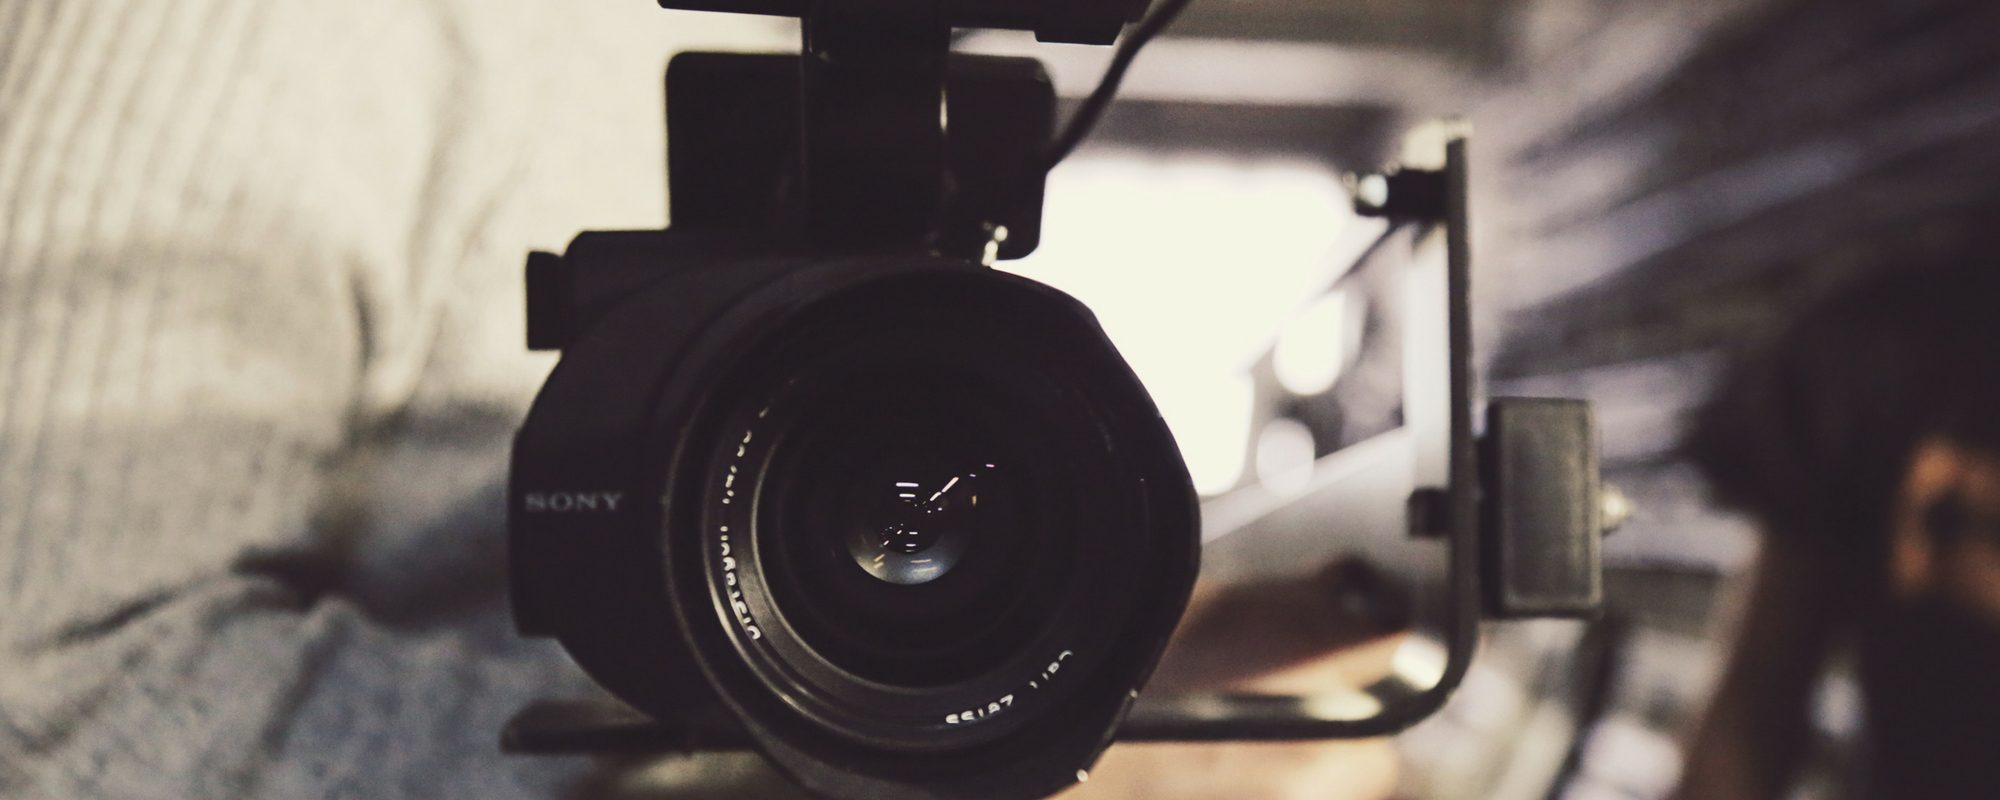 Ramp Up Event Video Production With An Effective Video Content Strategy and Repurposing Videos